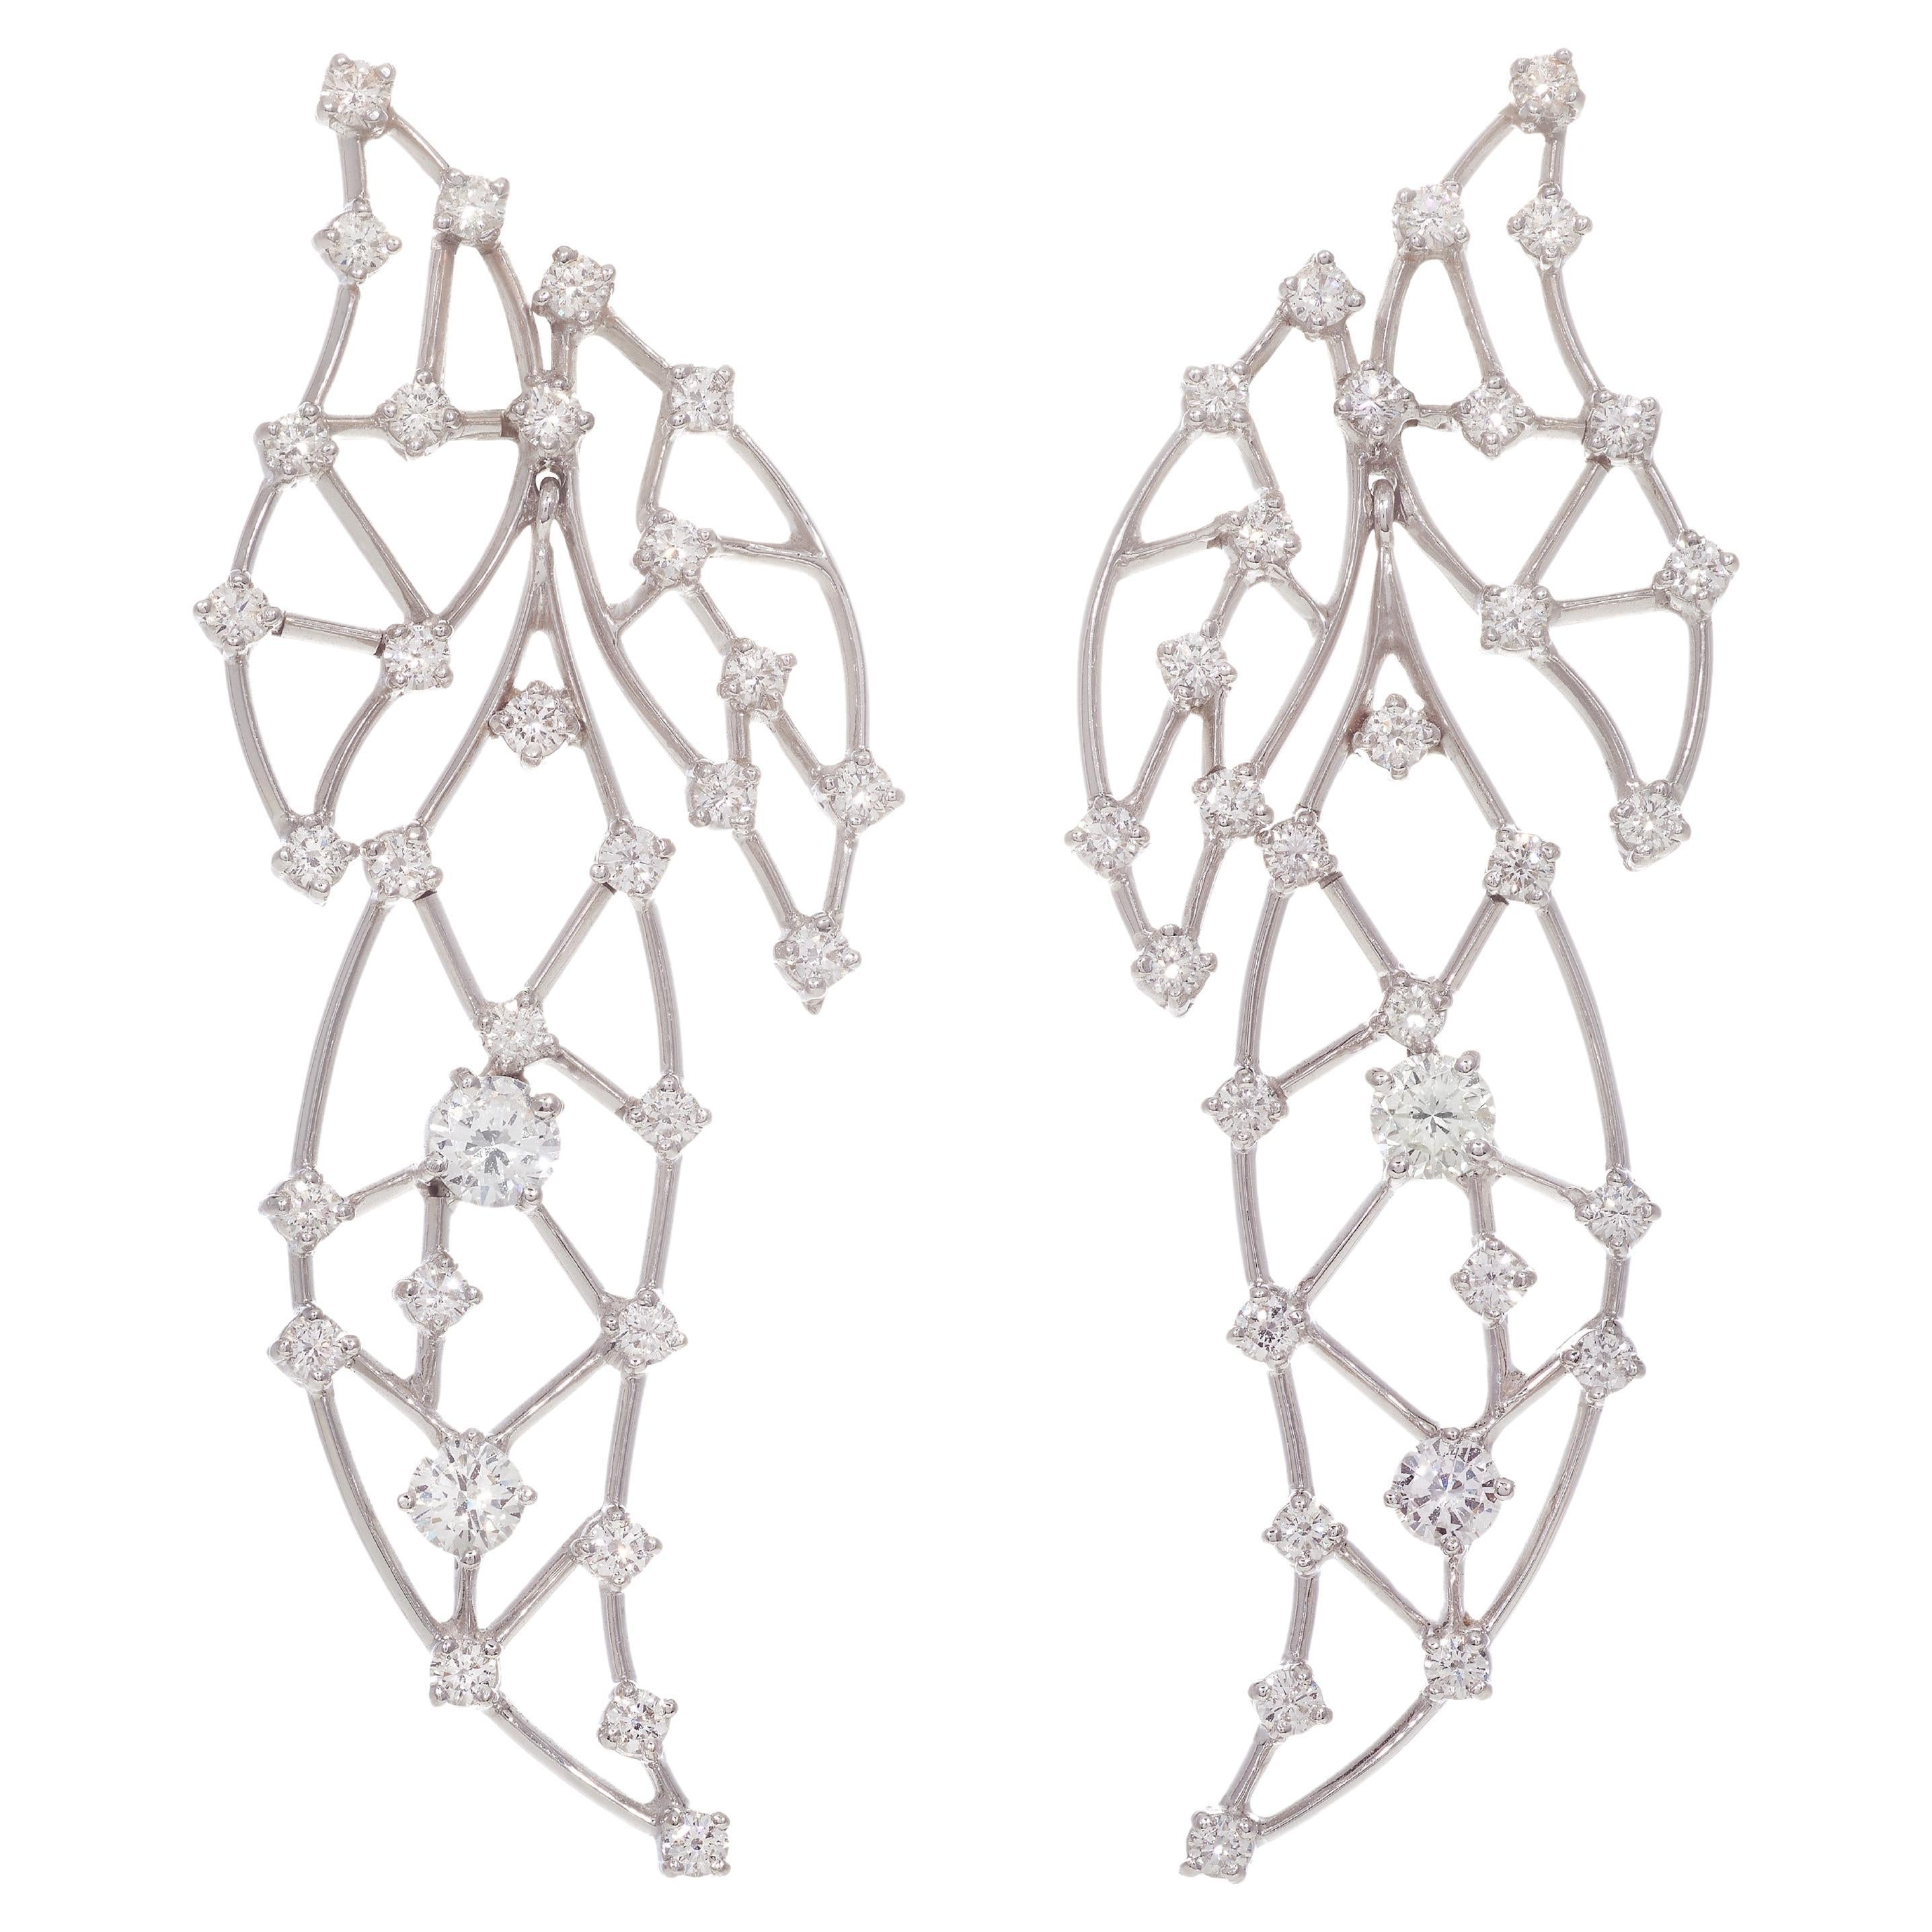 Contemporary Drop Earrings set in White Gold with Diamonds 